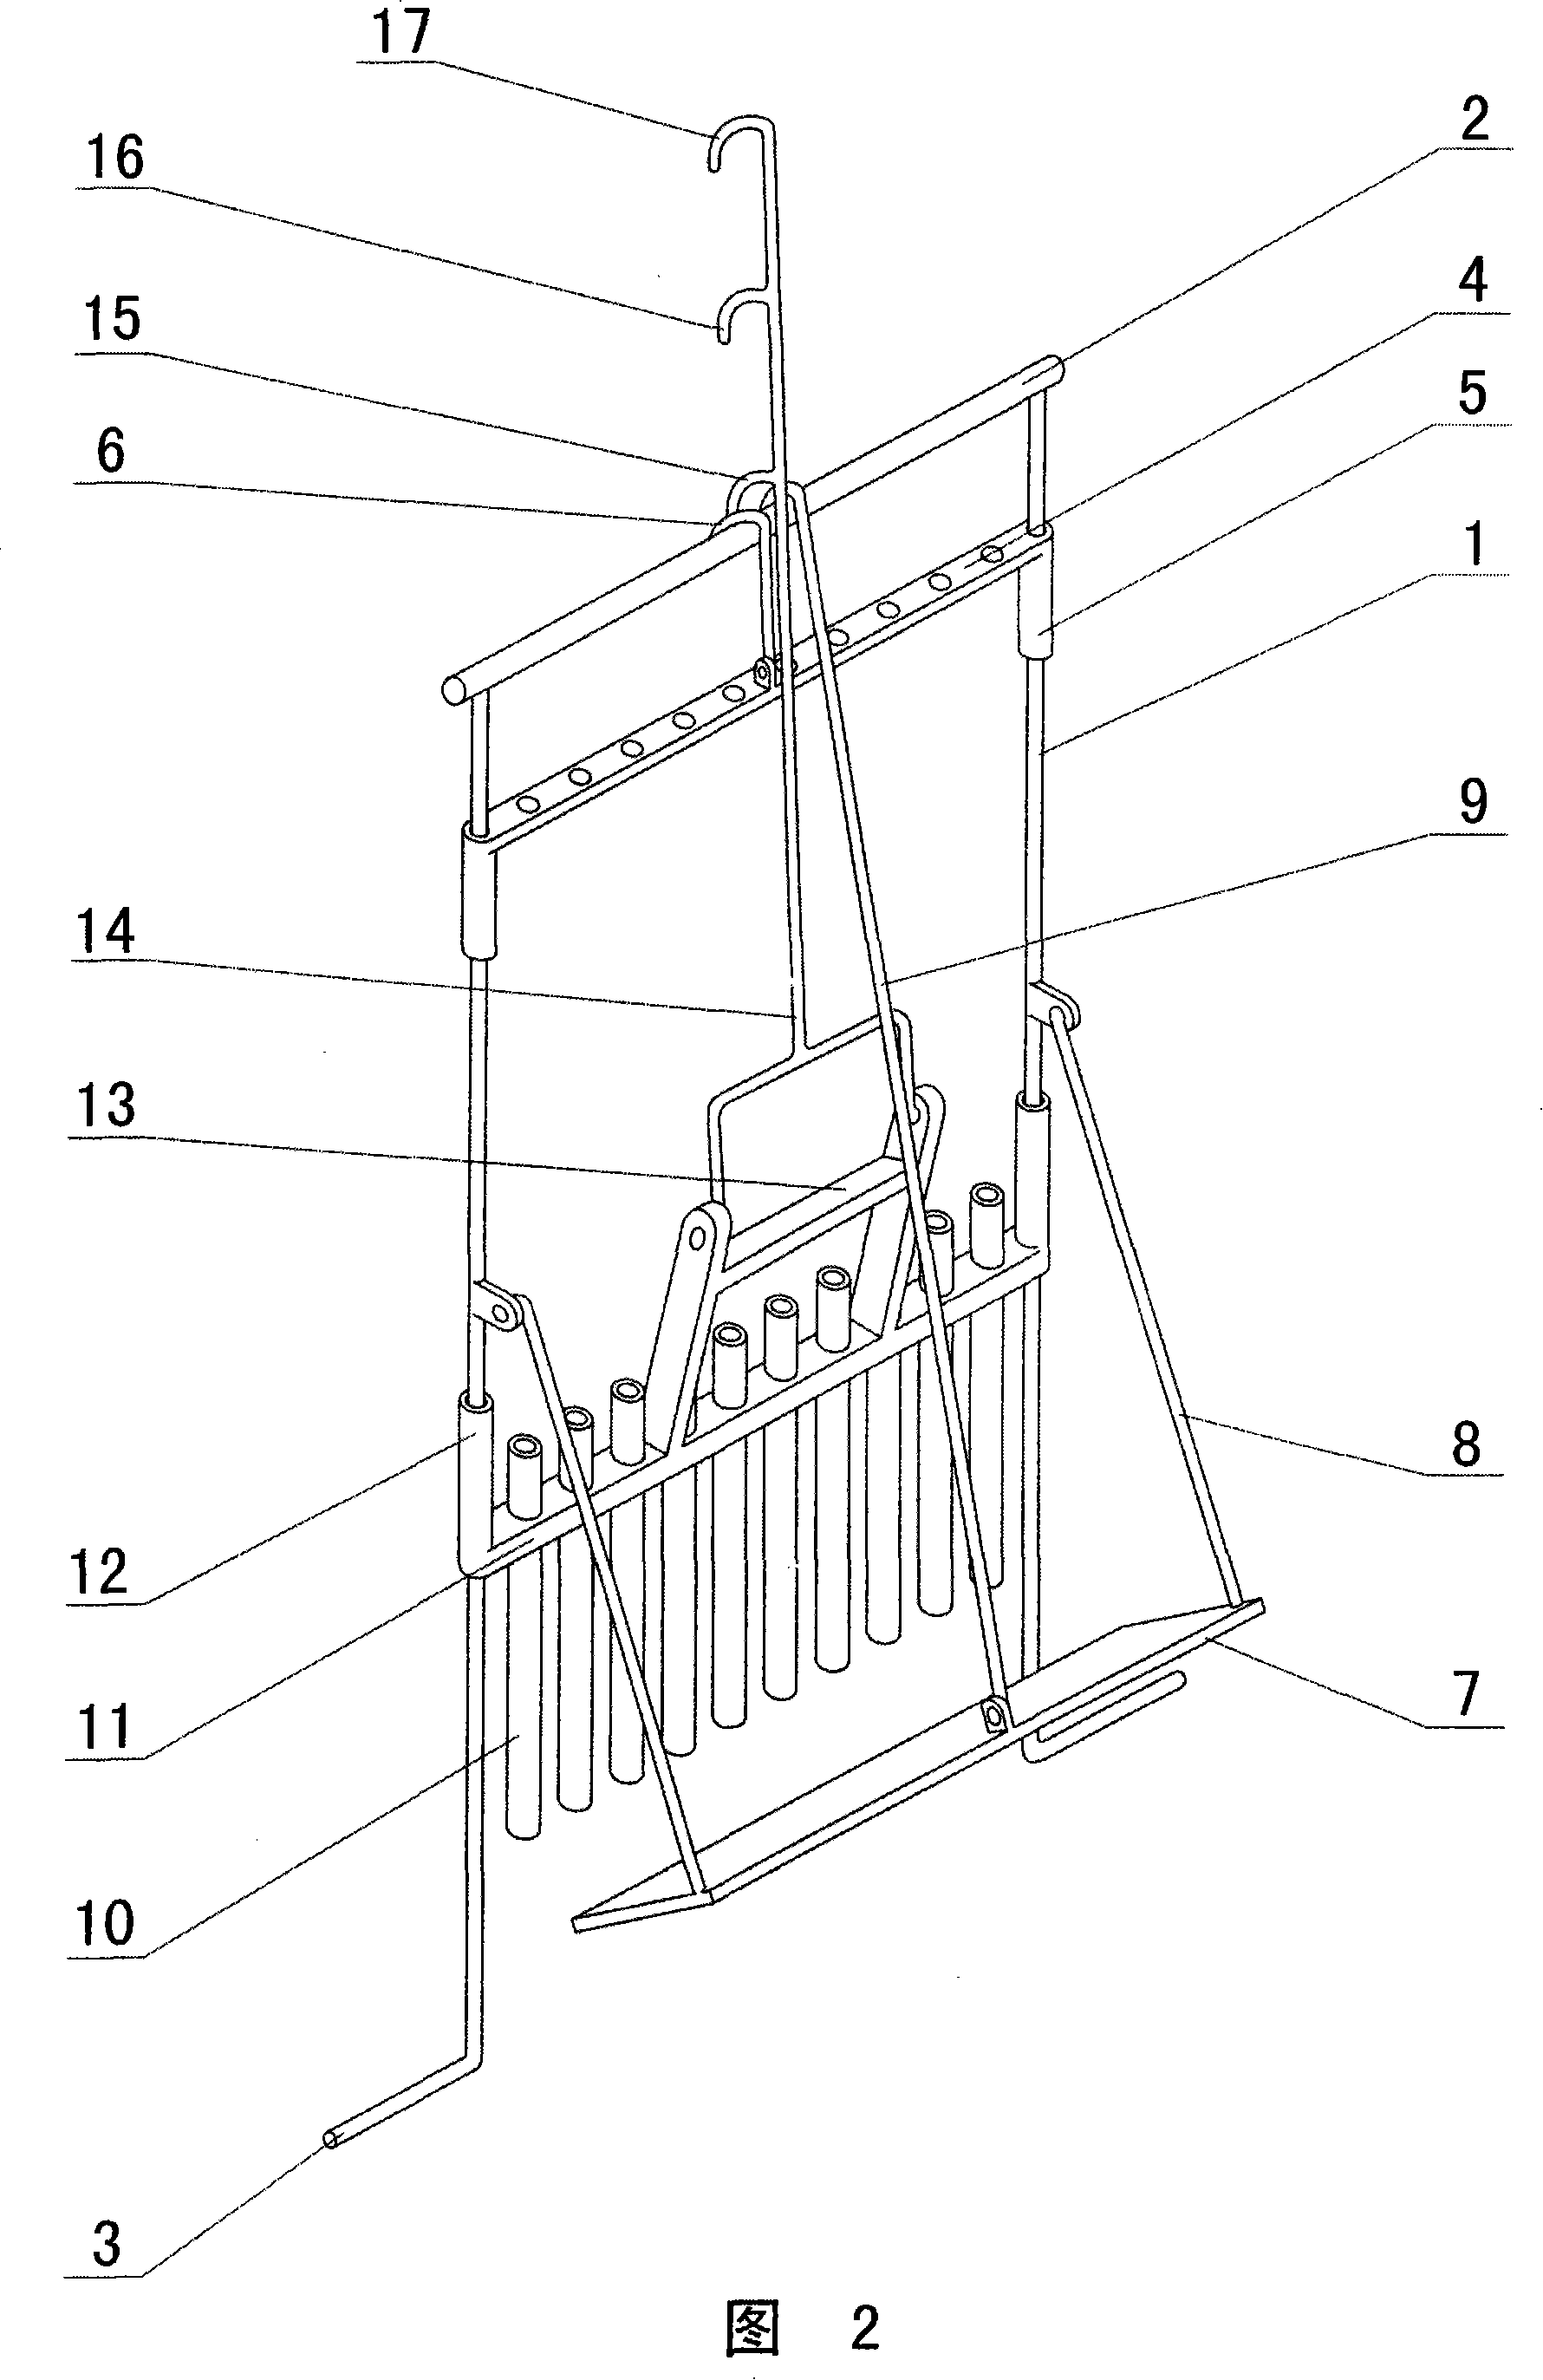 Method and apparatus for spread-planting and maintaining artificial grassplot